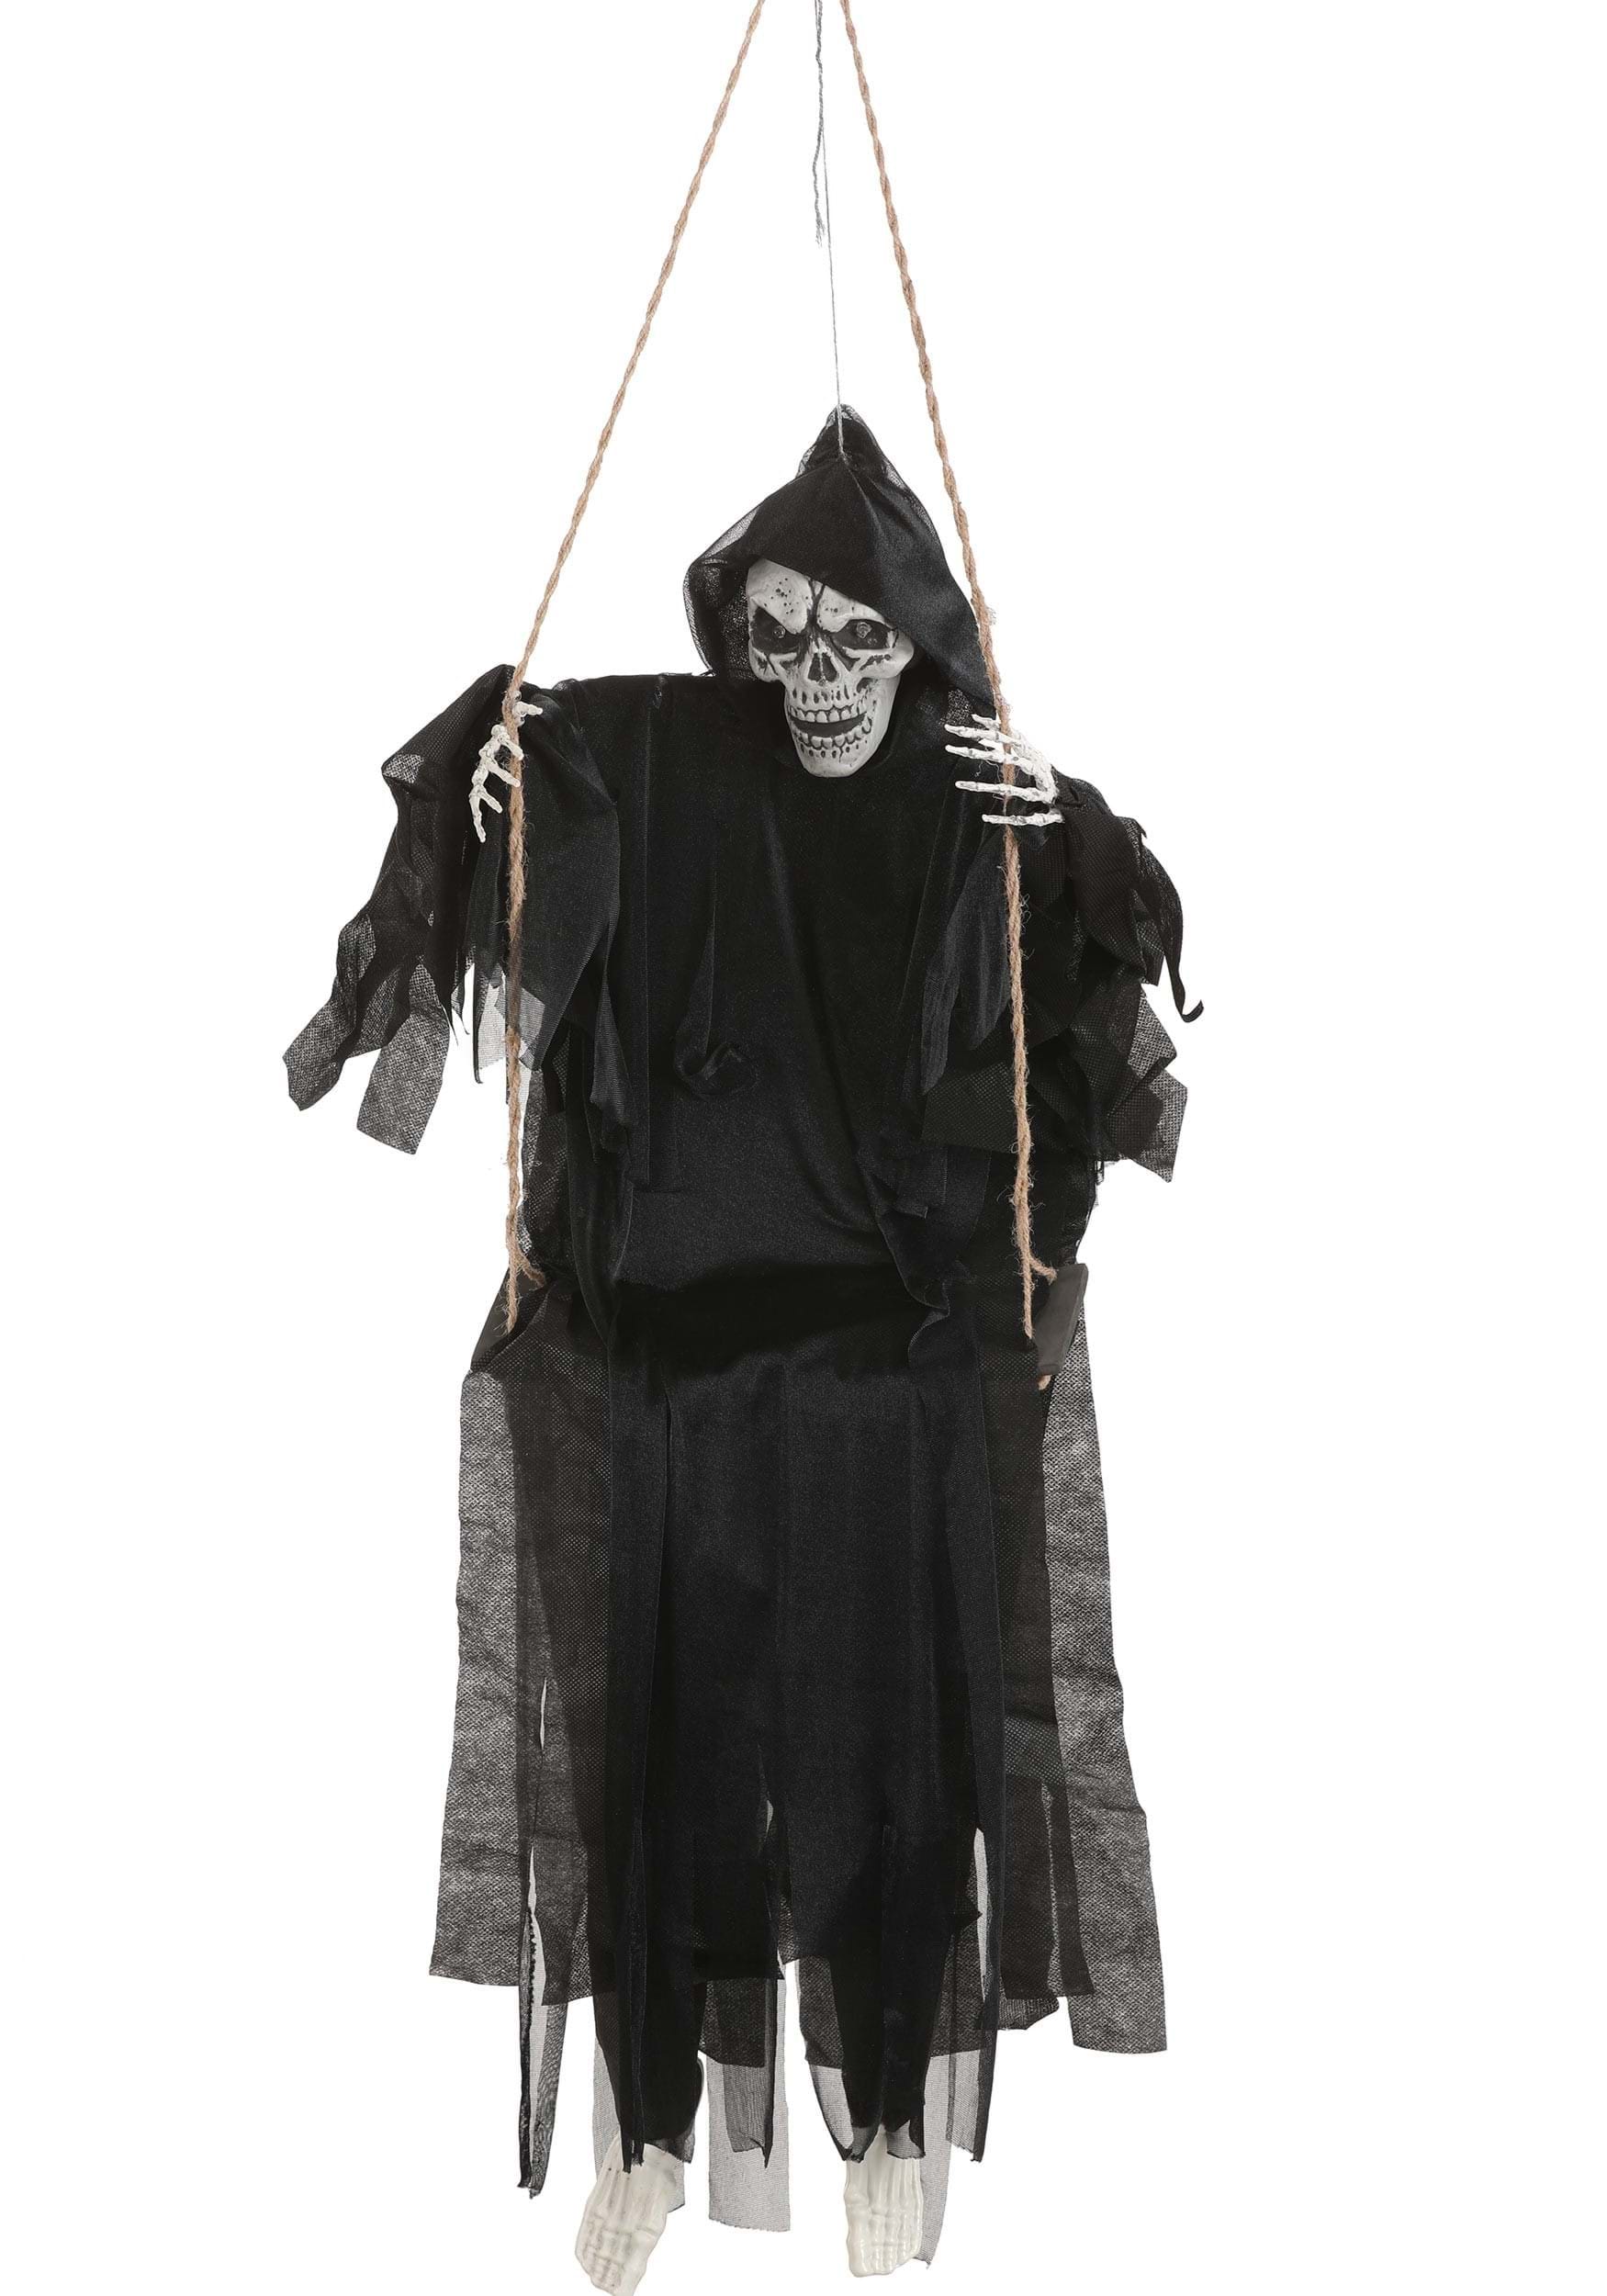 Photos - Other interior and decor FUN Costumes Sitting Reaper Prop Black/Gray FUN3288